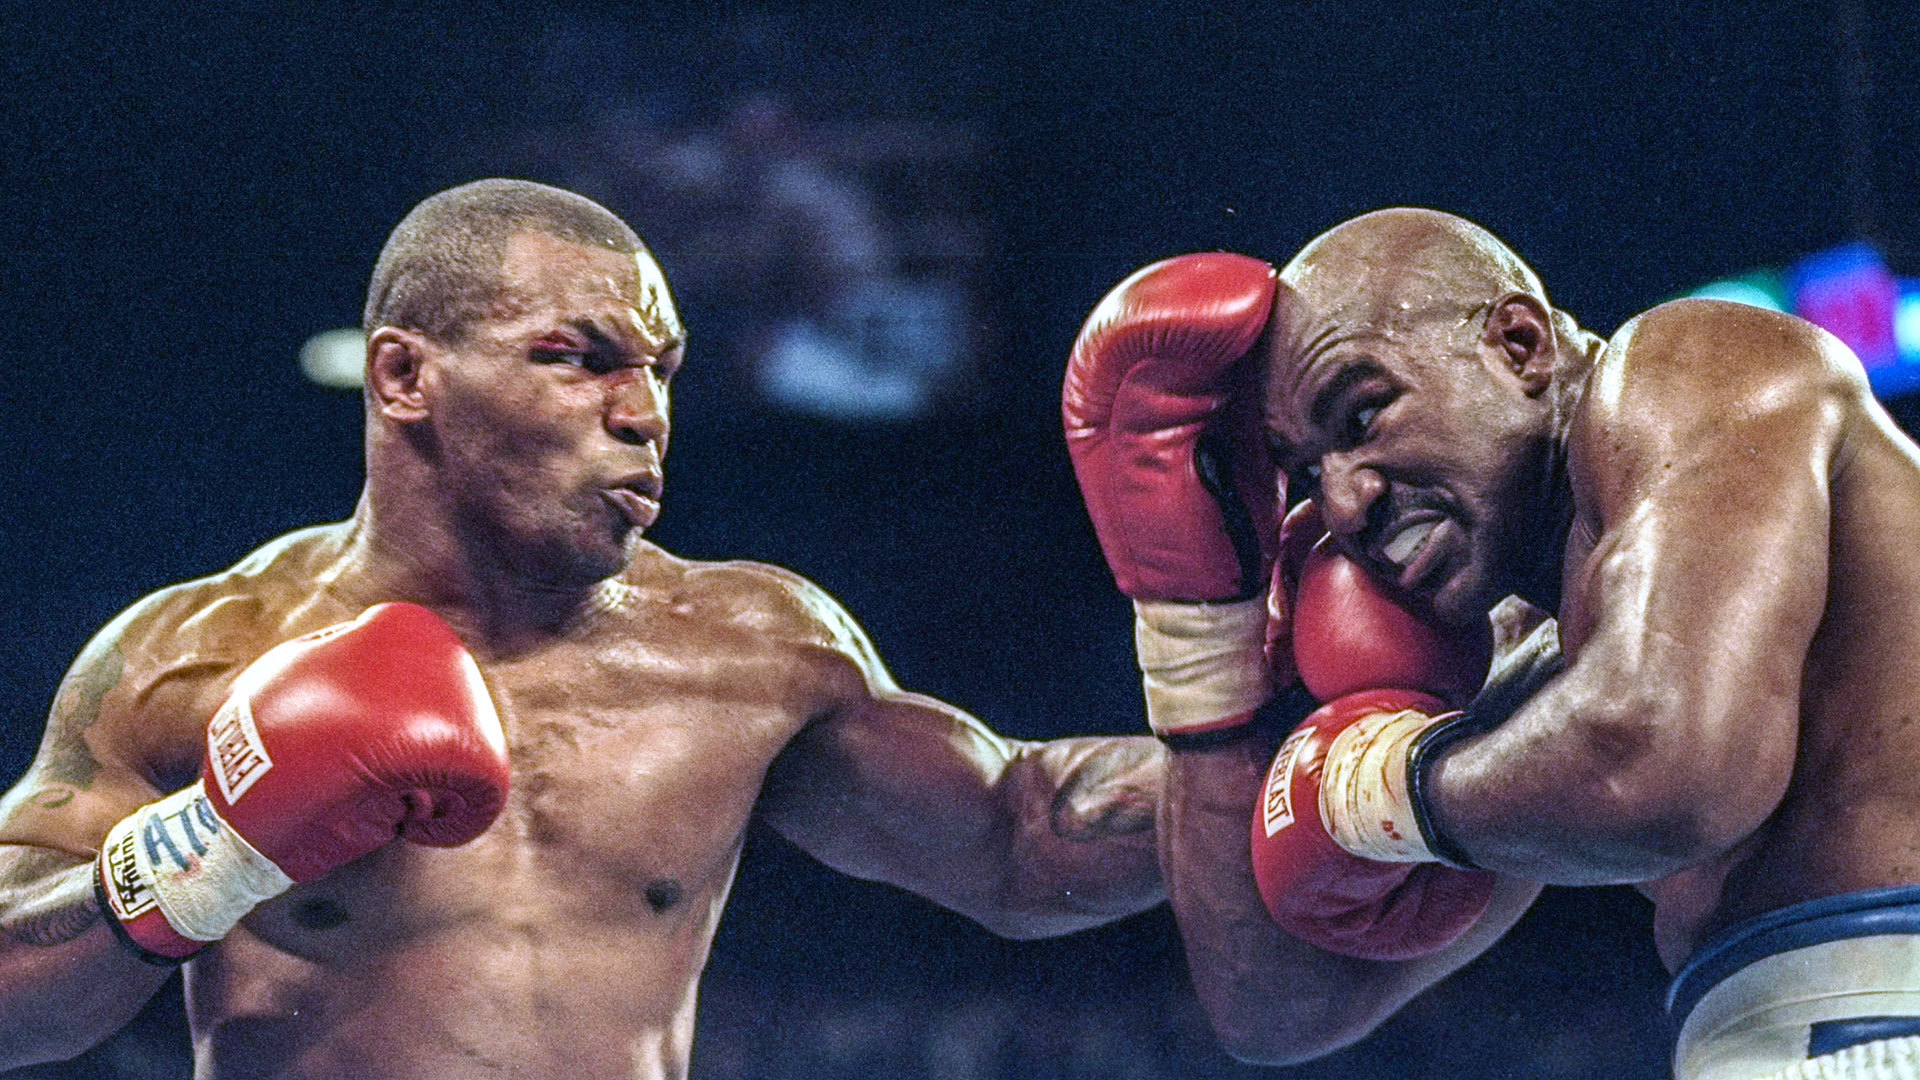 Mike Tyson Wallpaper Image Photos Pictures Background